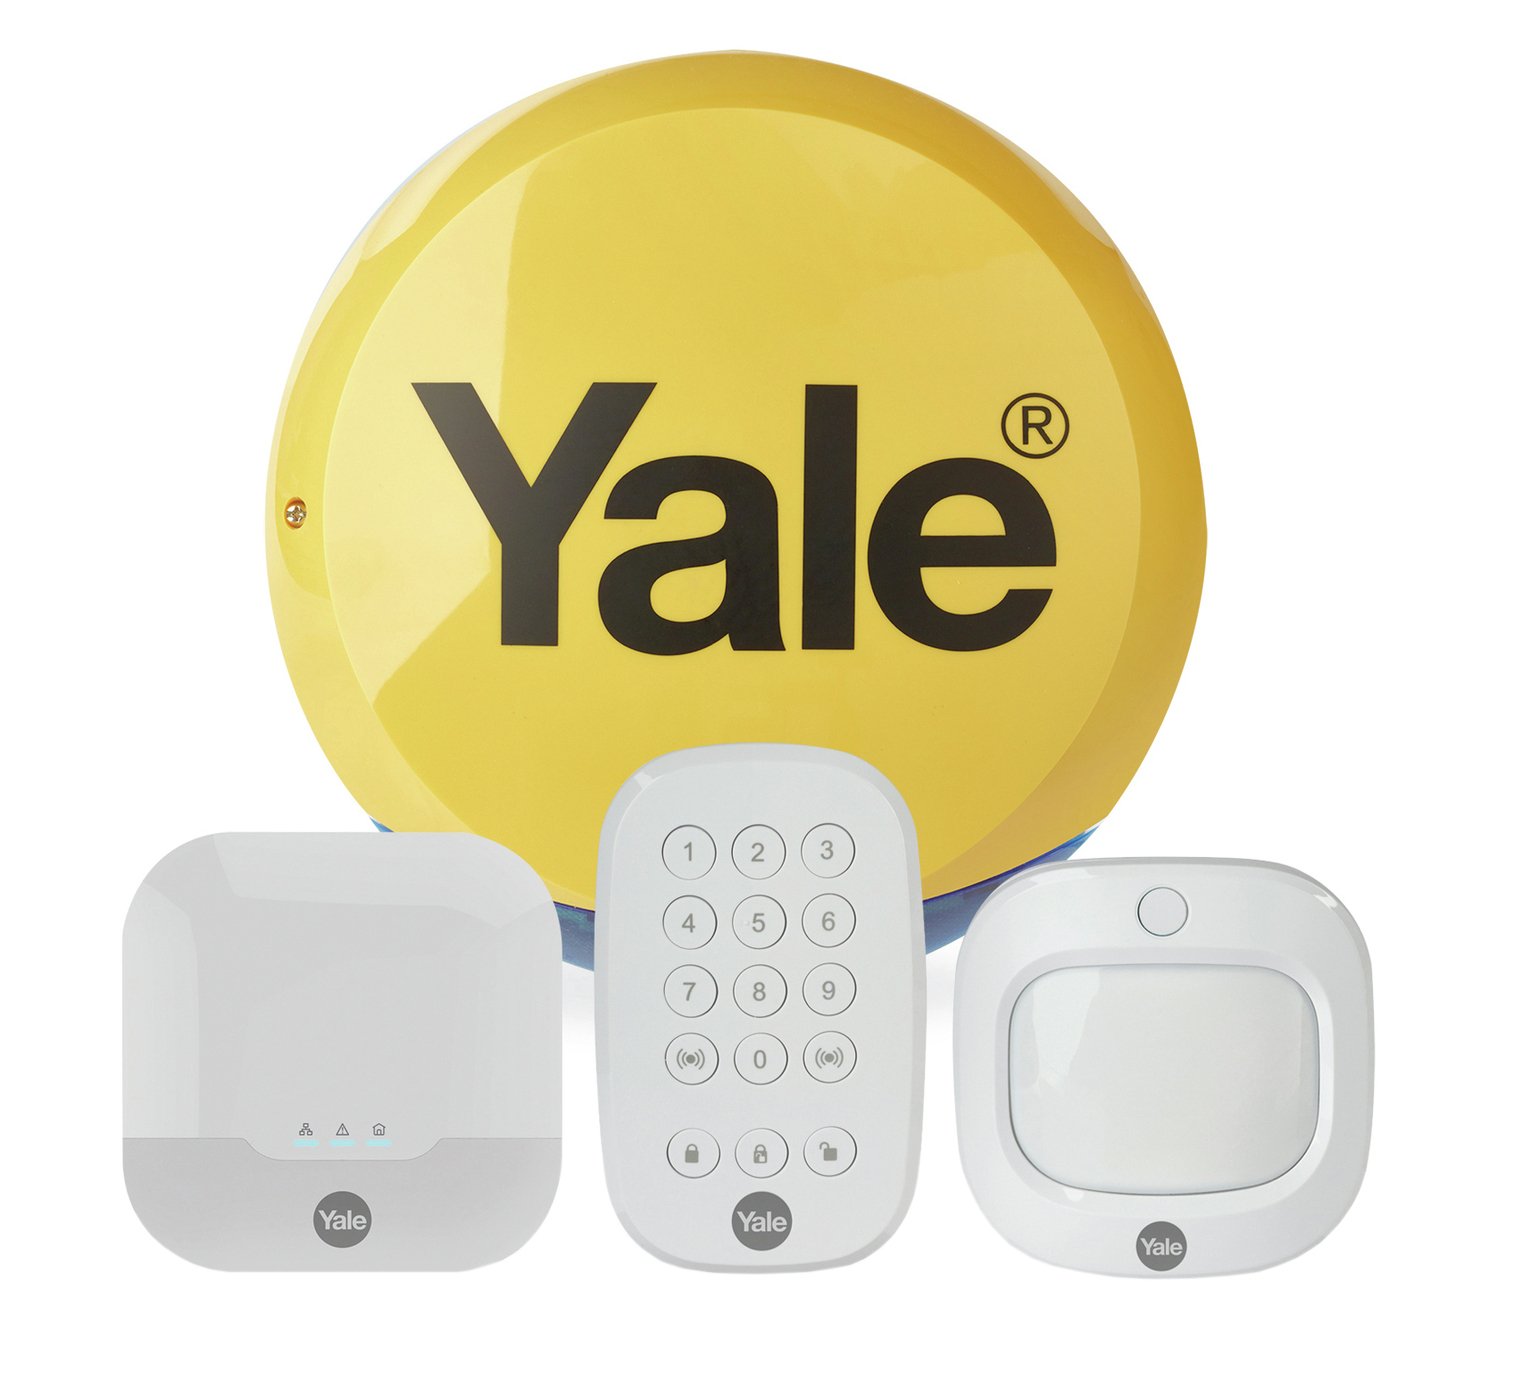 Yale Sync Smart Home Alarm Starter Kit Review